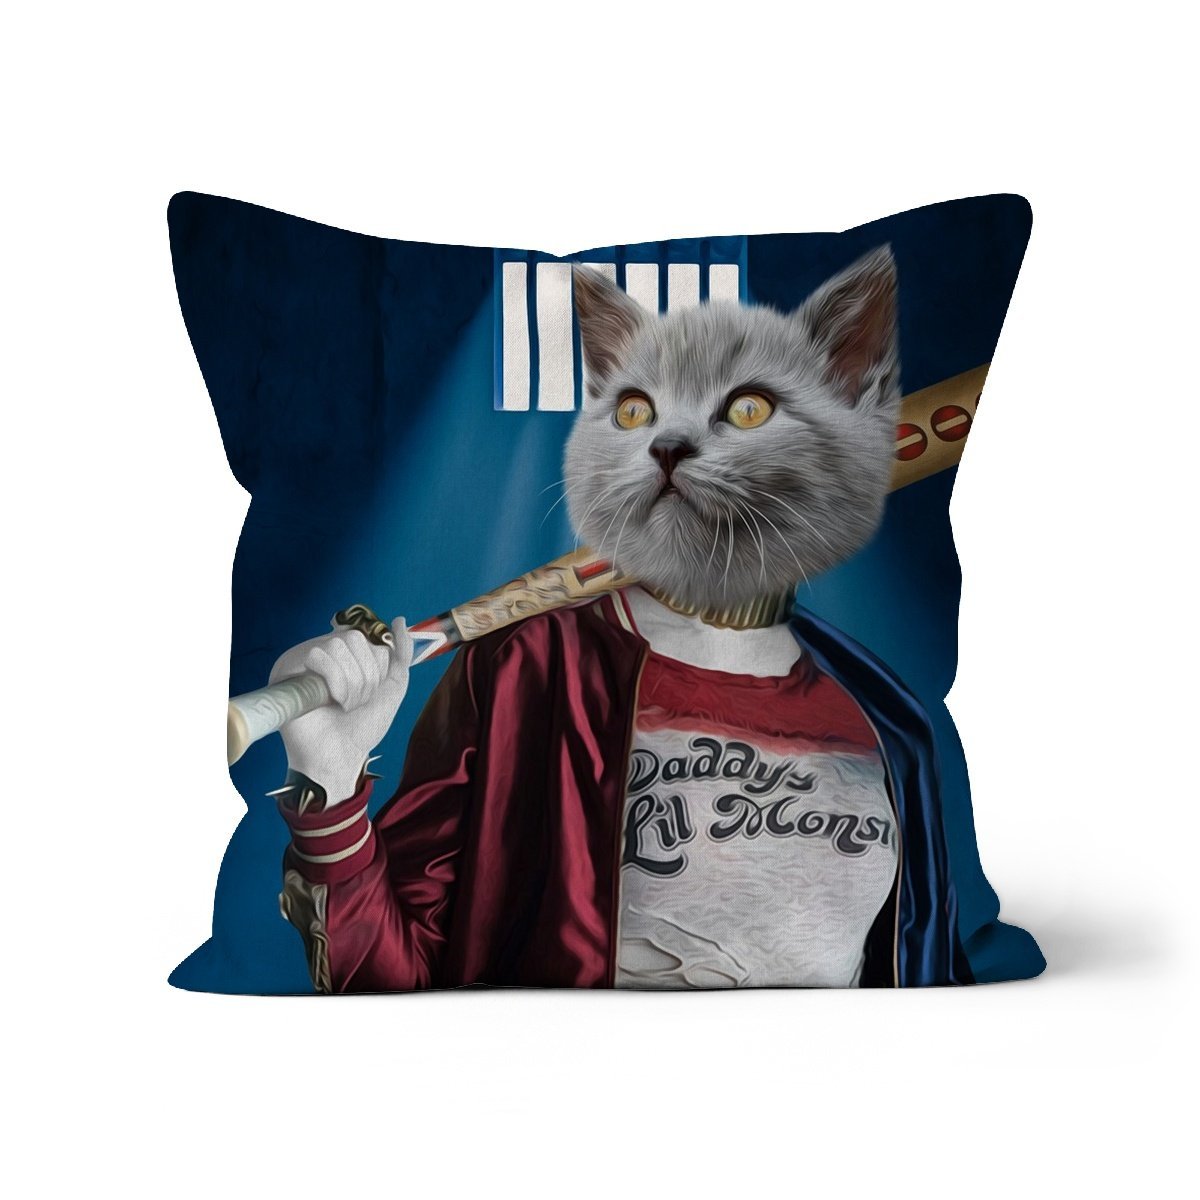 Harley Quinn: Custom Pet Cushion - Paw & Glory - #pet portraits# - #dog portraits# - #pet portraits uk#paw & glory, custom pet portrait pillow,dog pillows personalized, pet face pillows, dog photo on pillow, custom cat pillows, pillow with pet picture